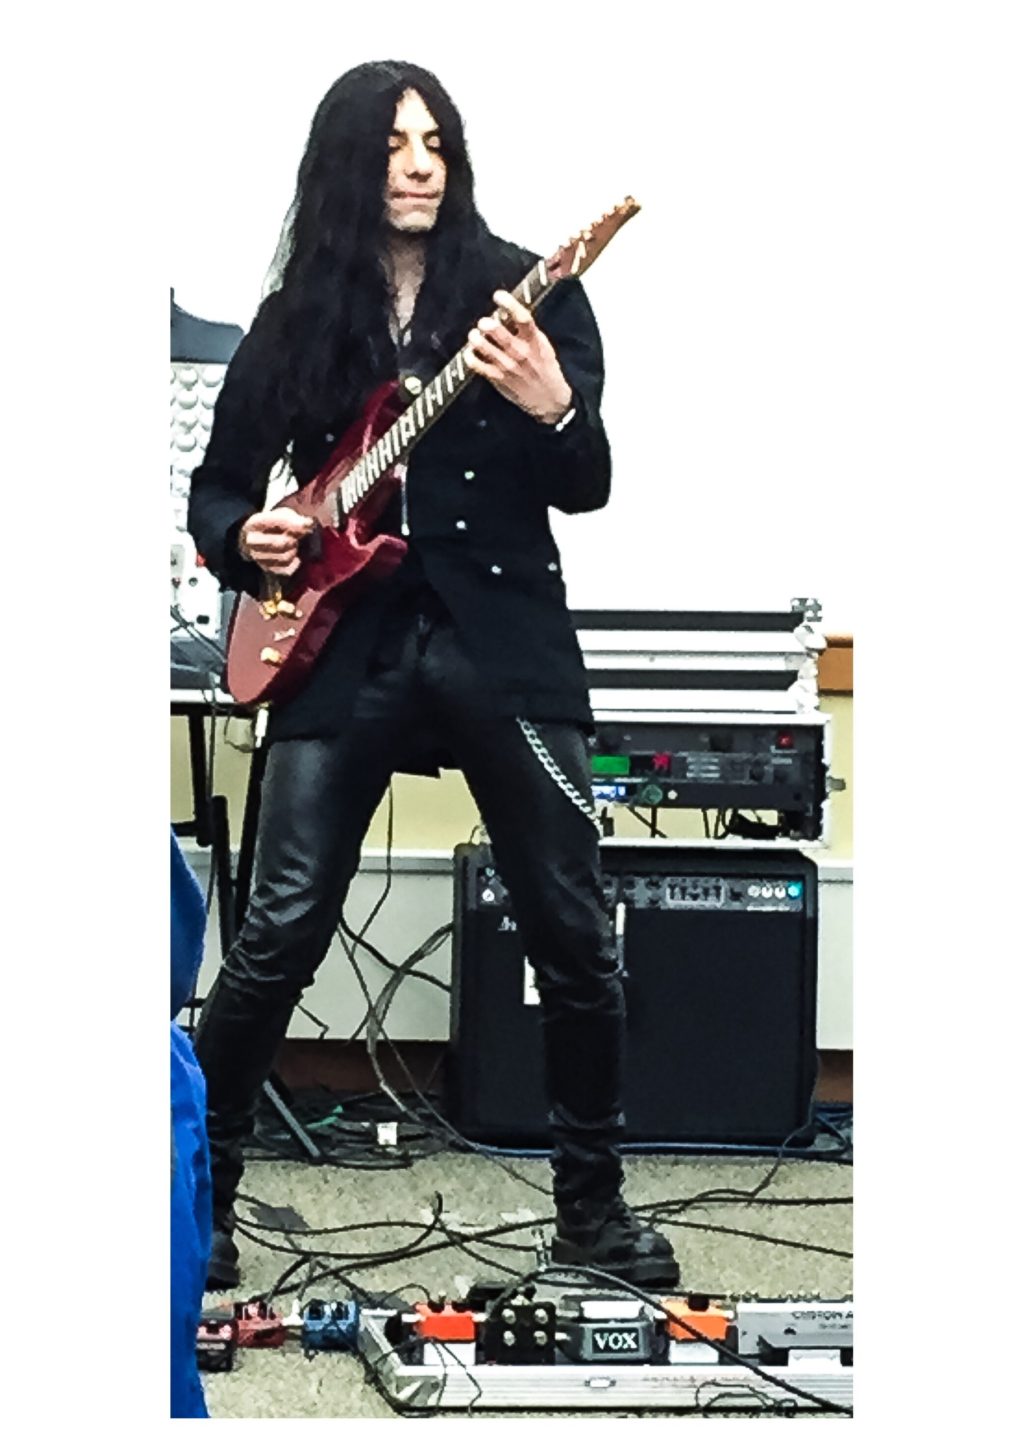 Mike Campese - First Night 2016, Saratoga.